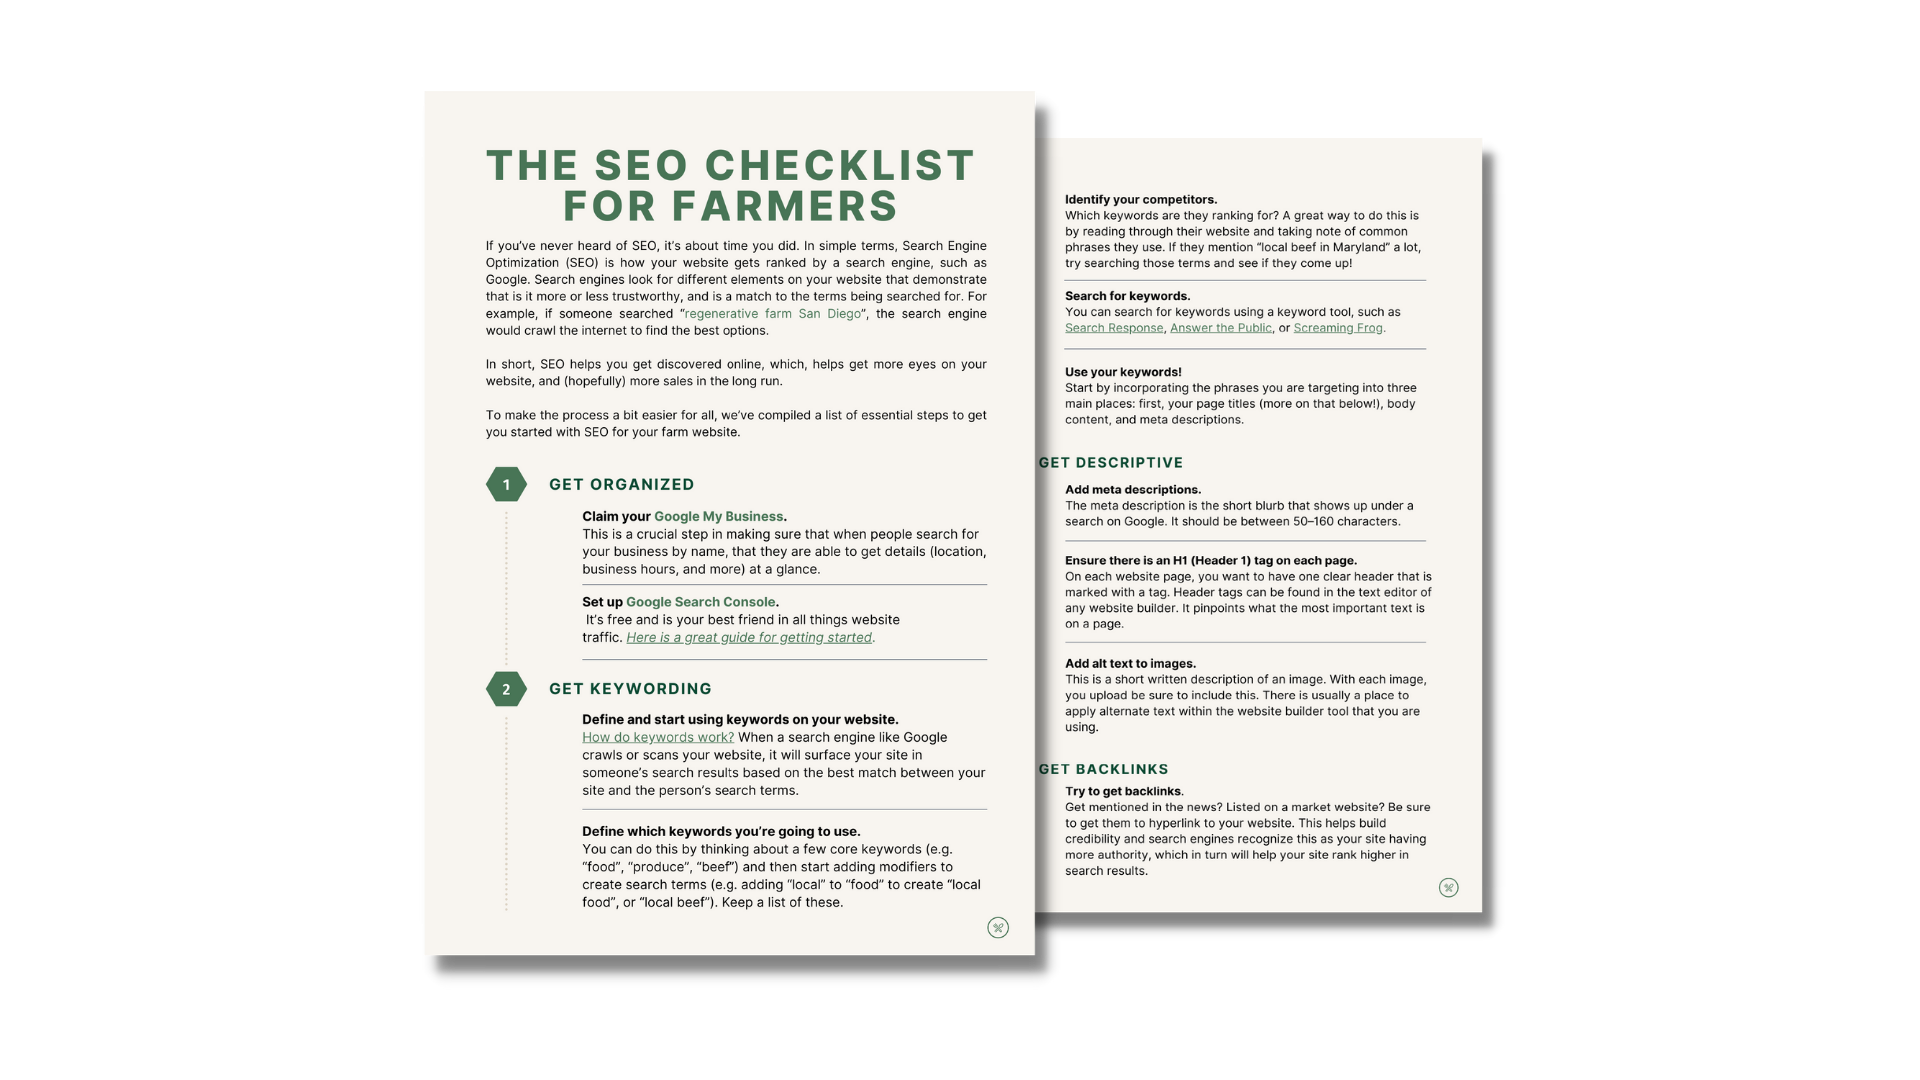 Email Graphic The SEO Checklist for Farmers